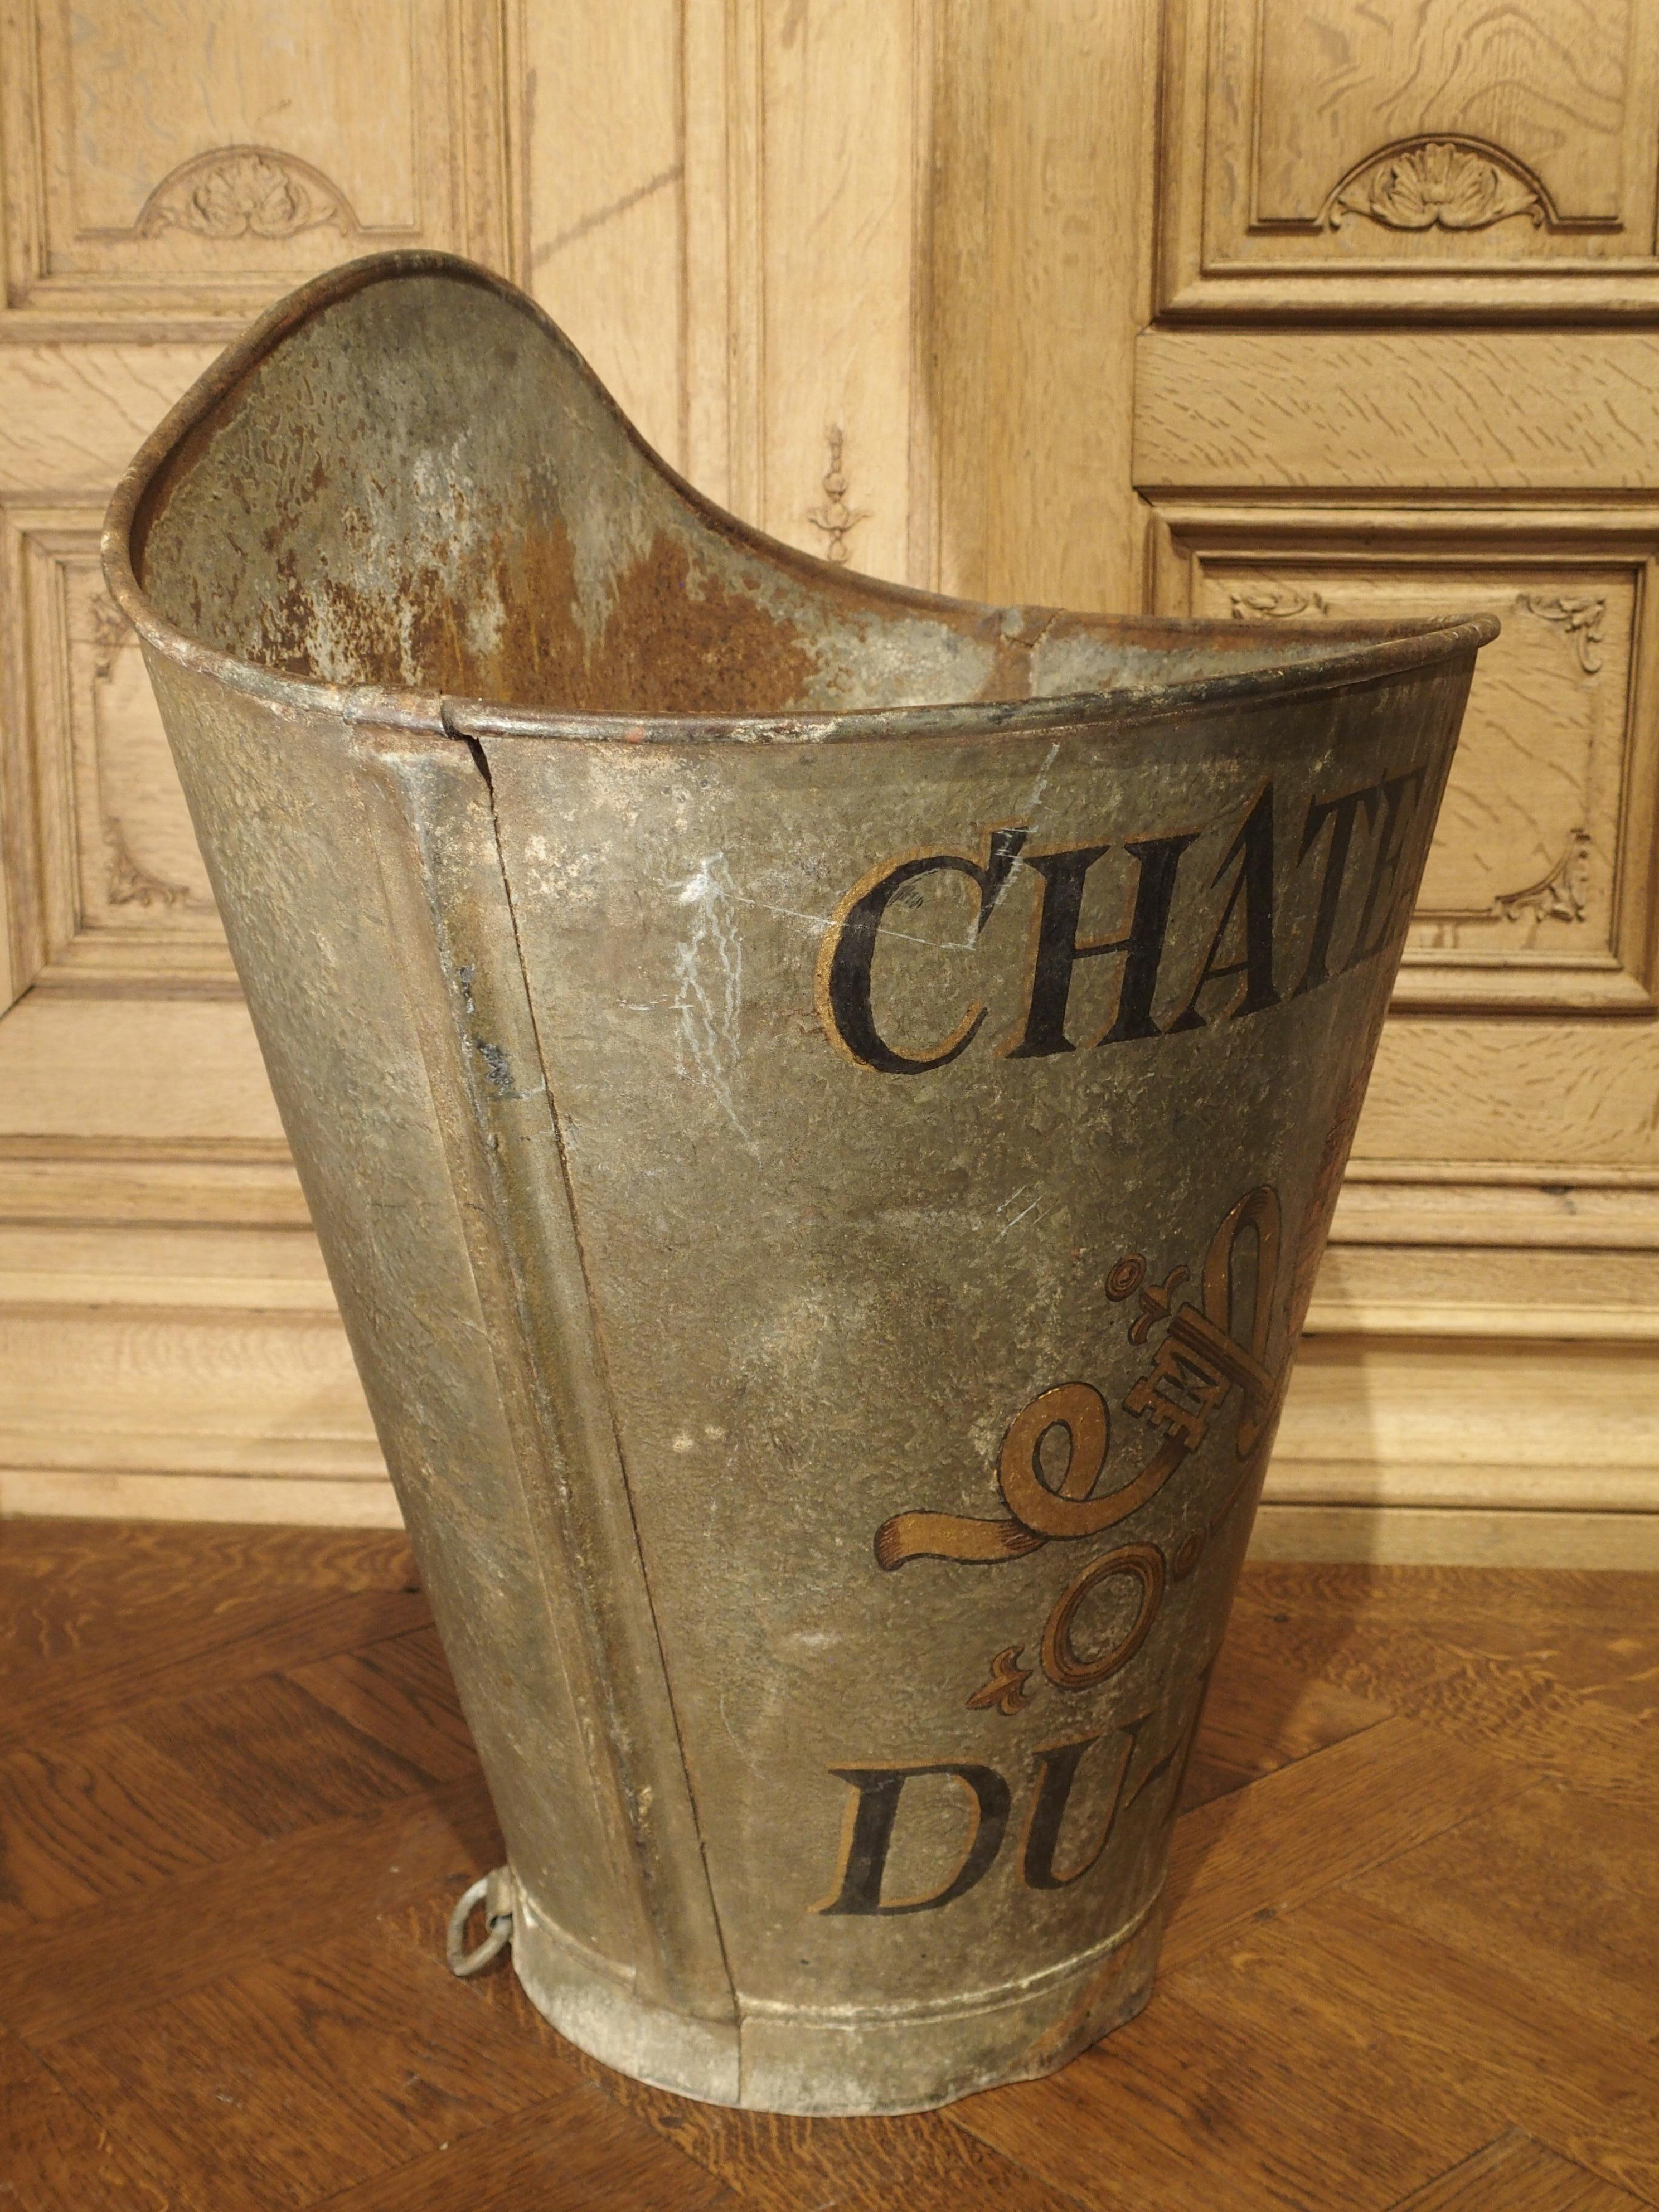 This French metal container is known as an hotte. Hottes were used during the 19th and early 20th centuries for collecting grapes in vineyards. The vineyard employee would attach the hotte to his/her back and place the harvested grapes directly into